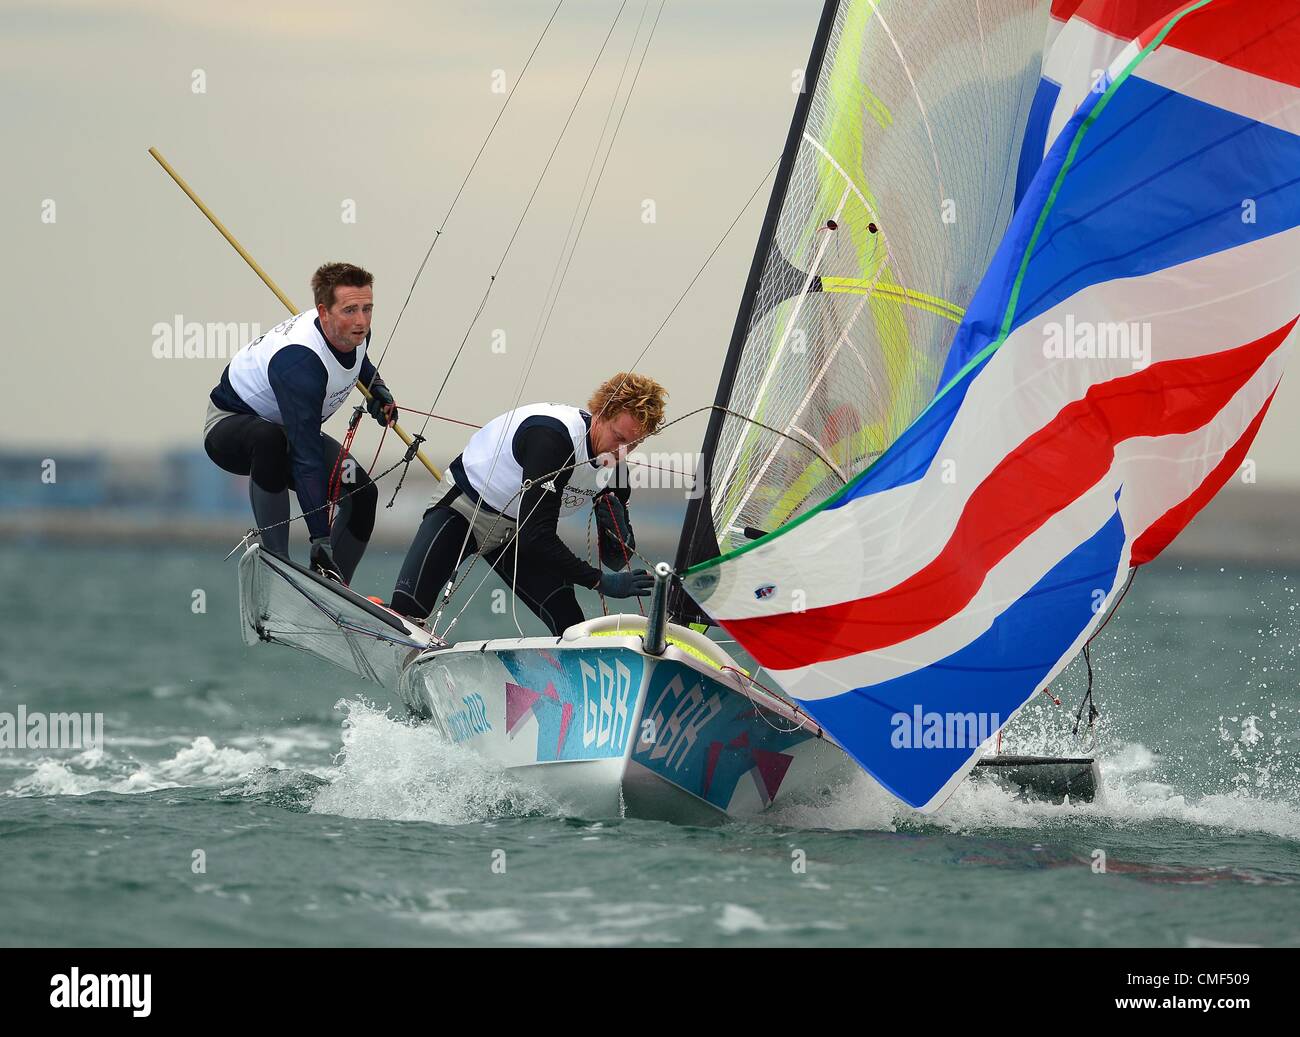 1st Aug 2012. London 2012 Olympics: Sailing, action during the London 2012 Olympic Games at the Weymouth & Portland Venue, Dorset, Britain, UK.  Stevie Morrison and Ben Rhodes from Great Britain in the Men's 49er race August 01st, 2012 PICTURE BY: DORSET MEDIA SERVICE Stock Photo